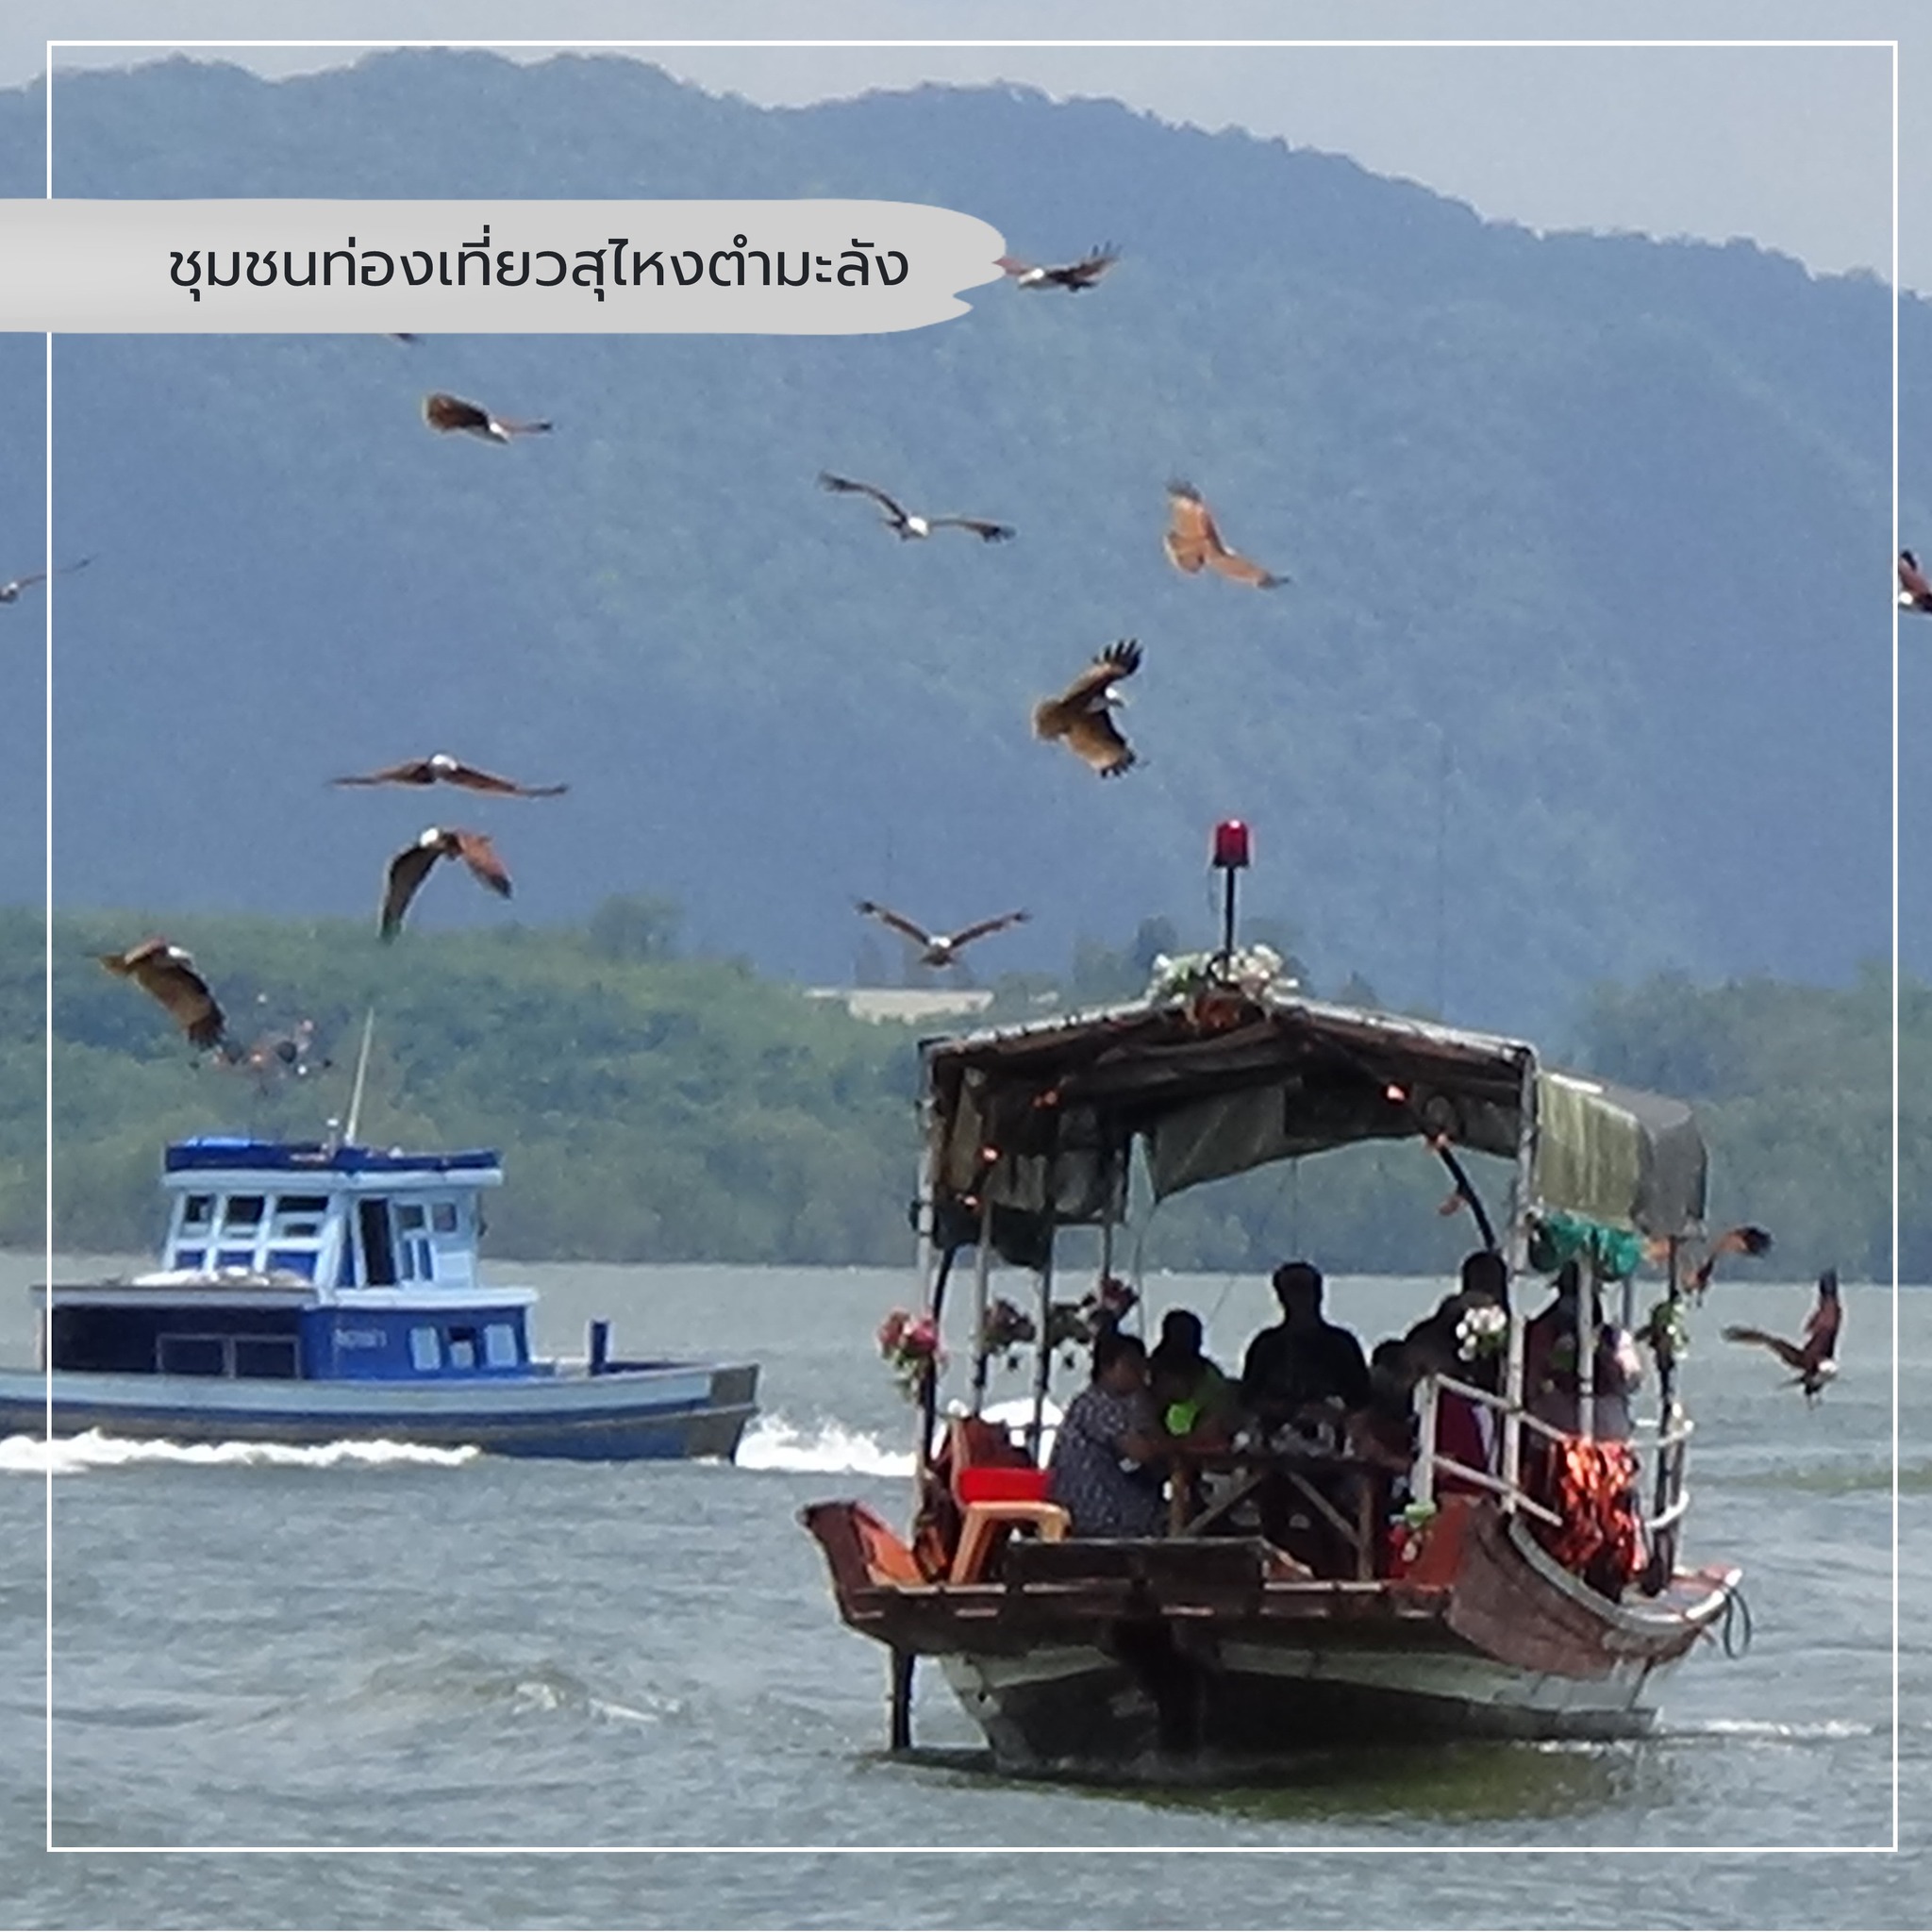 Sungai Tammalang Tourism Community: Take a cruise to see the eagles and eat seafood.